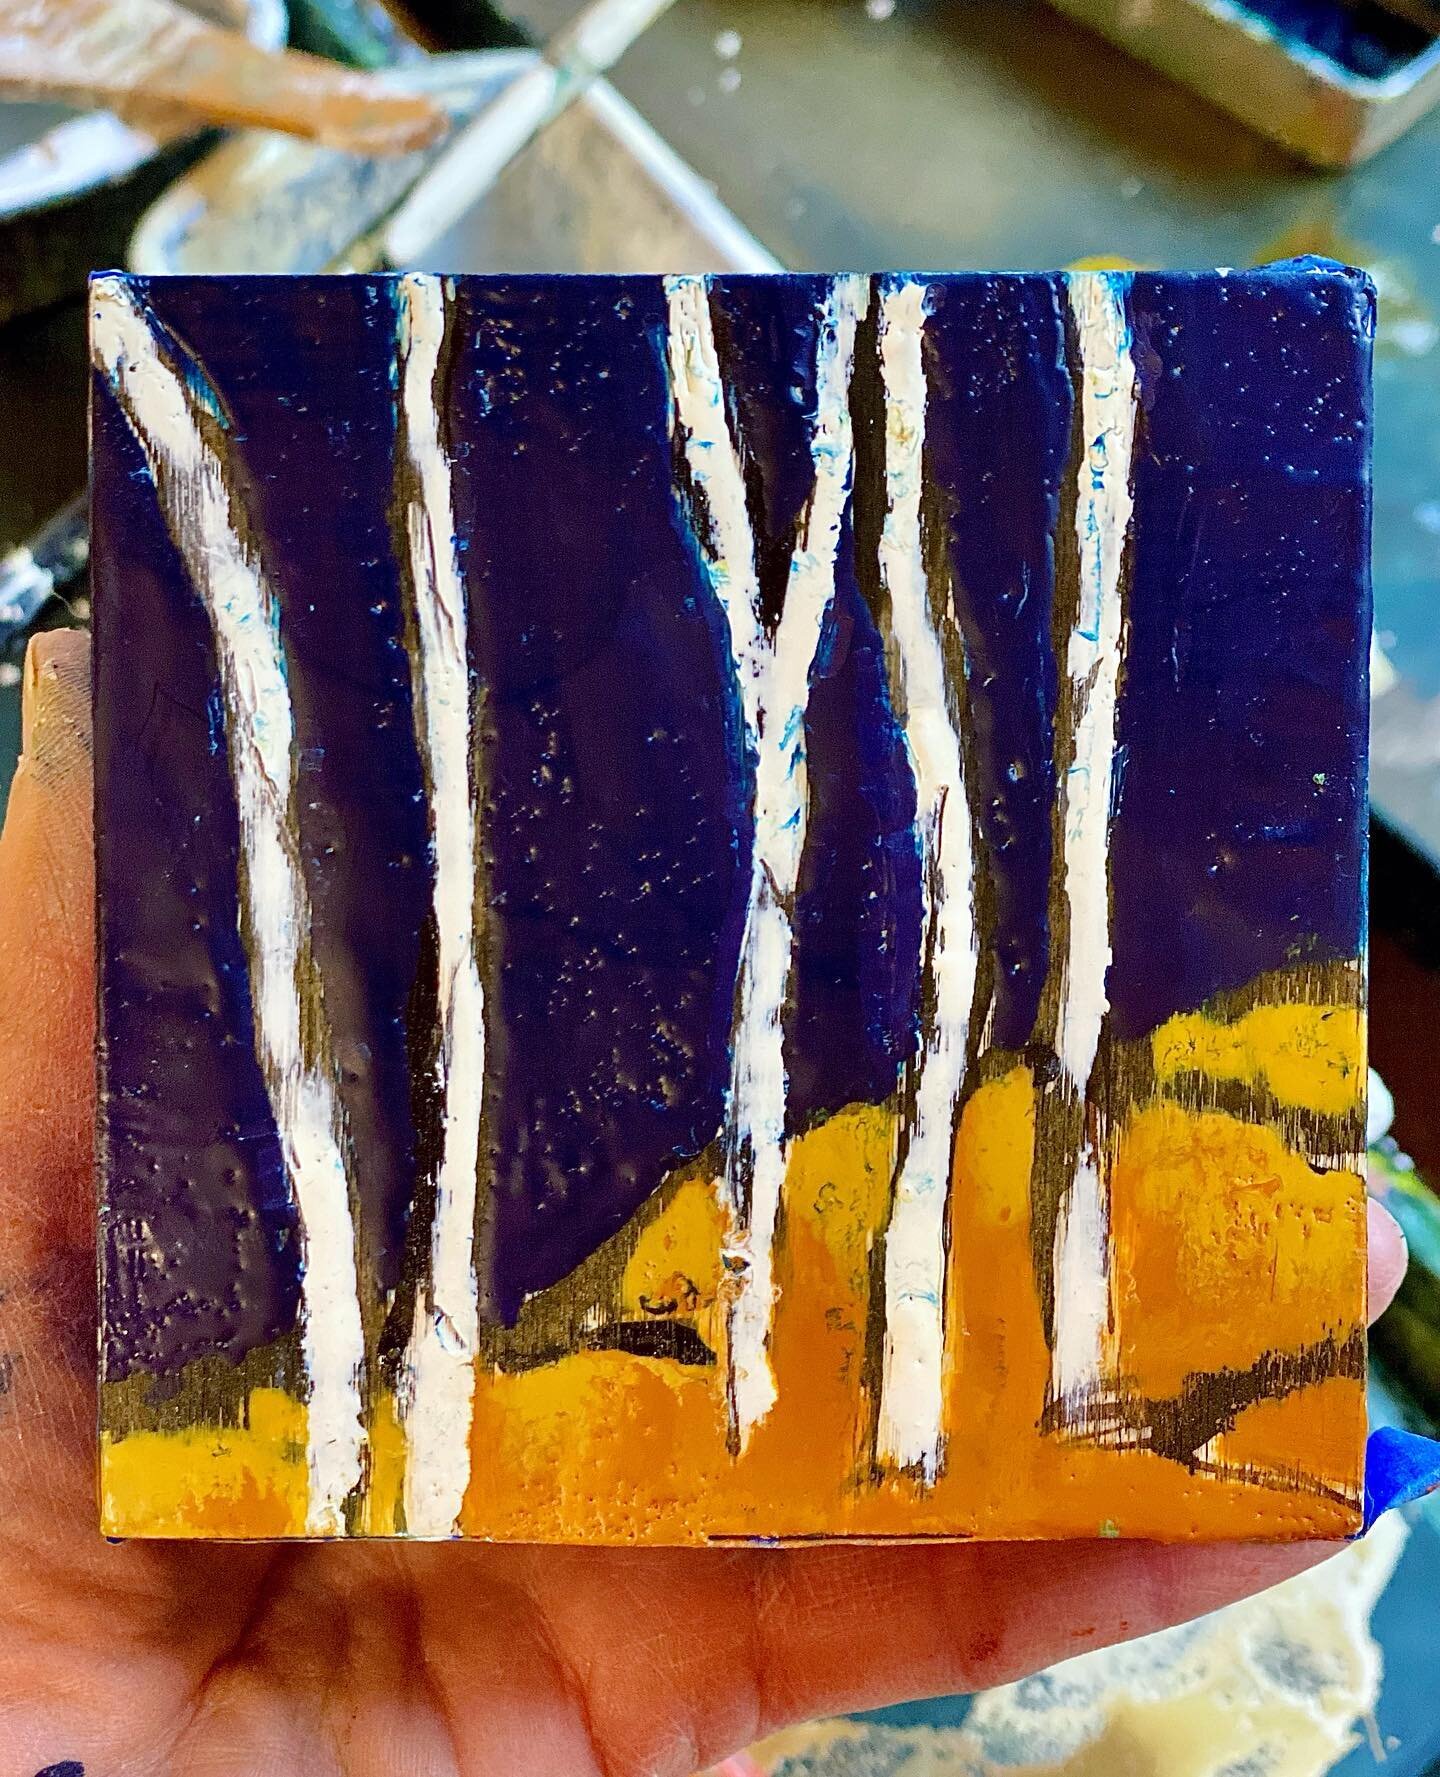 finishing up this little 4x4&rdquo; encaustic just in time for this weekend&rsquo;s South End Open Studios. 
So much great art to see in various locations throughout the neighborhood.  Check out @useaboston for all the details :)